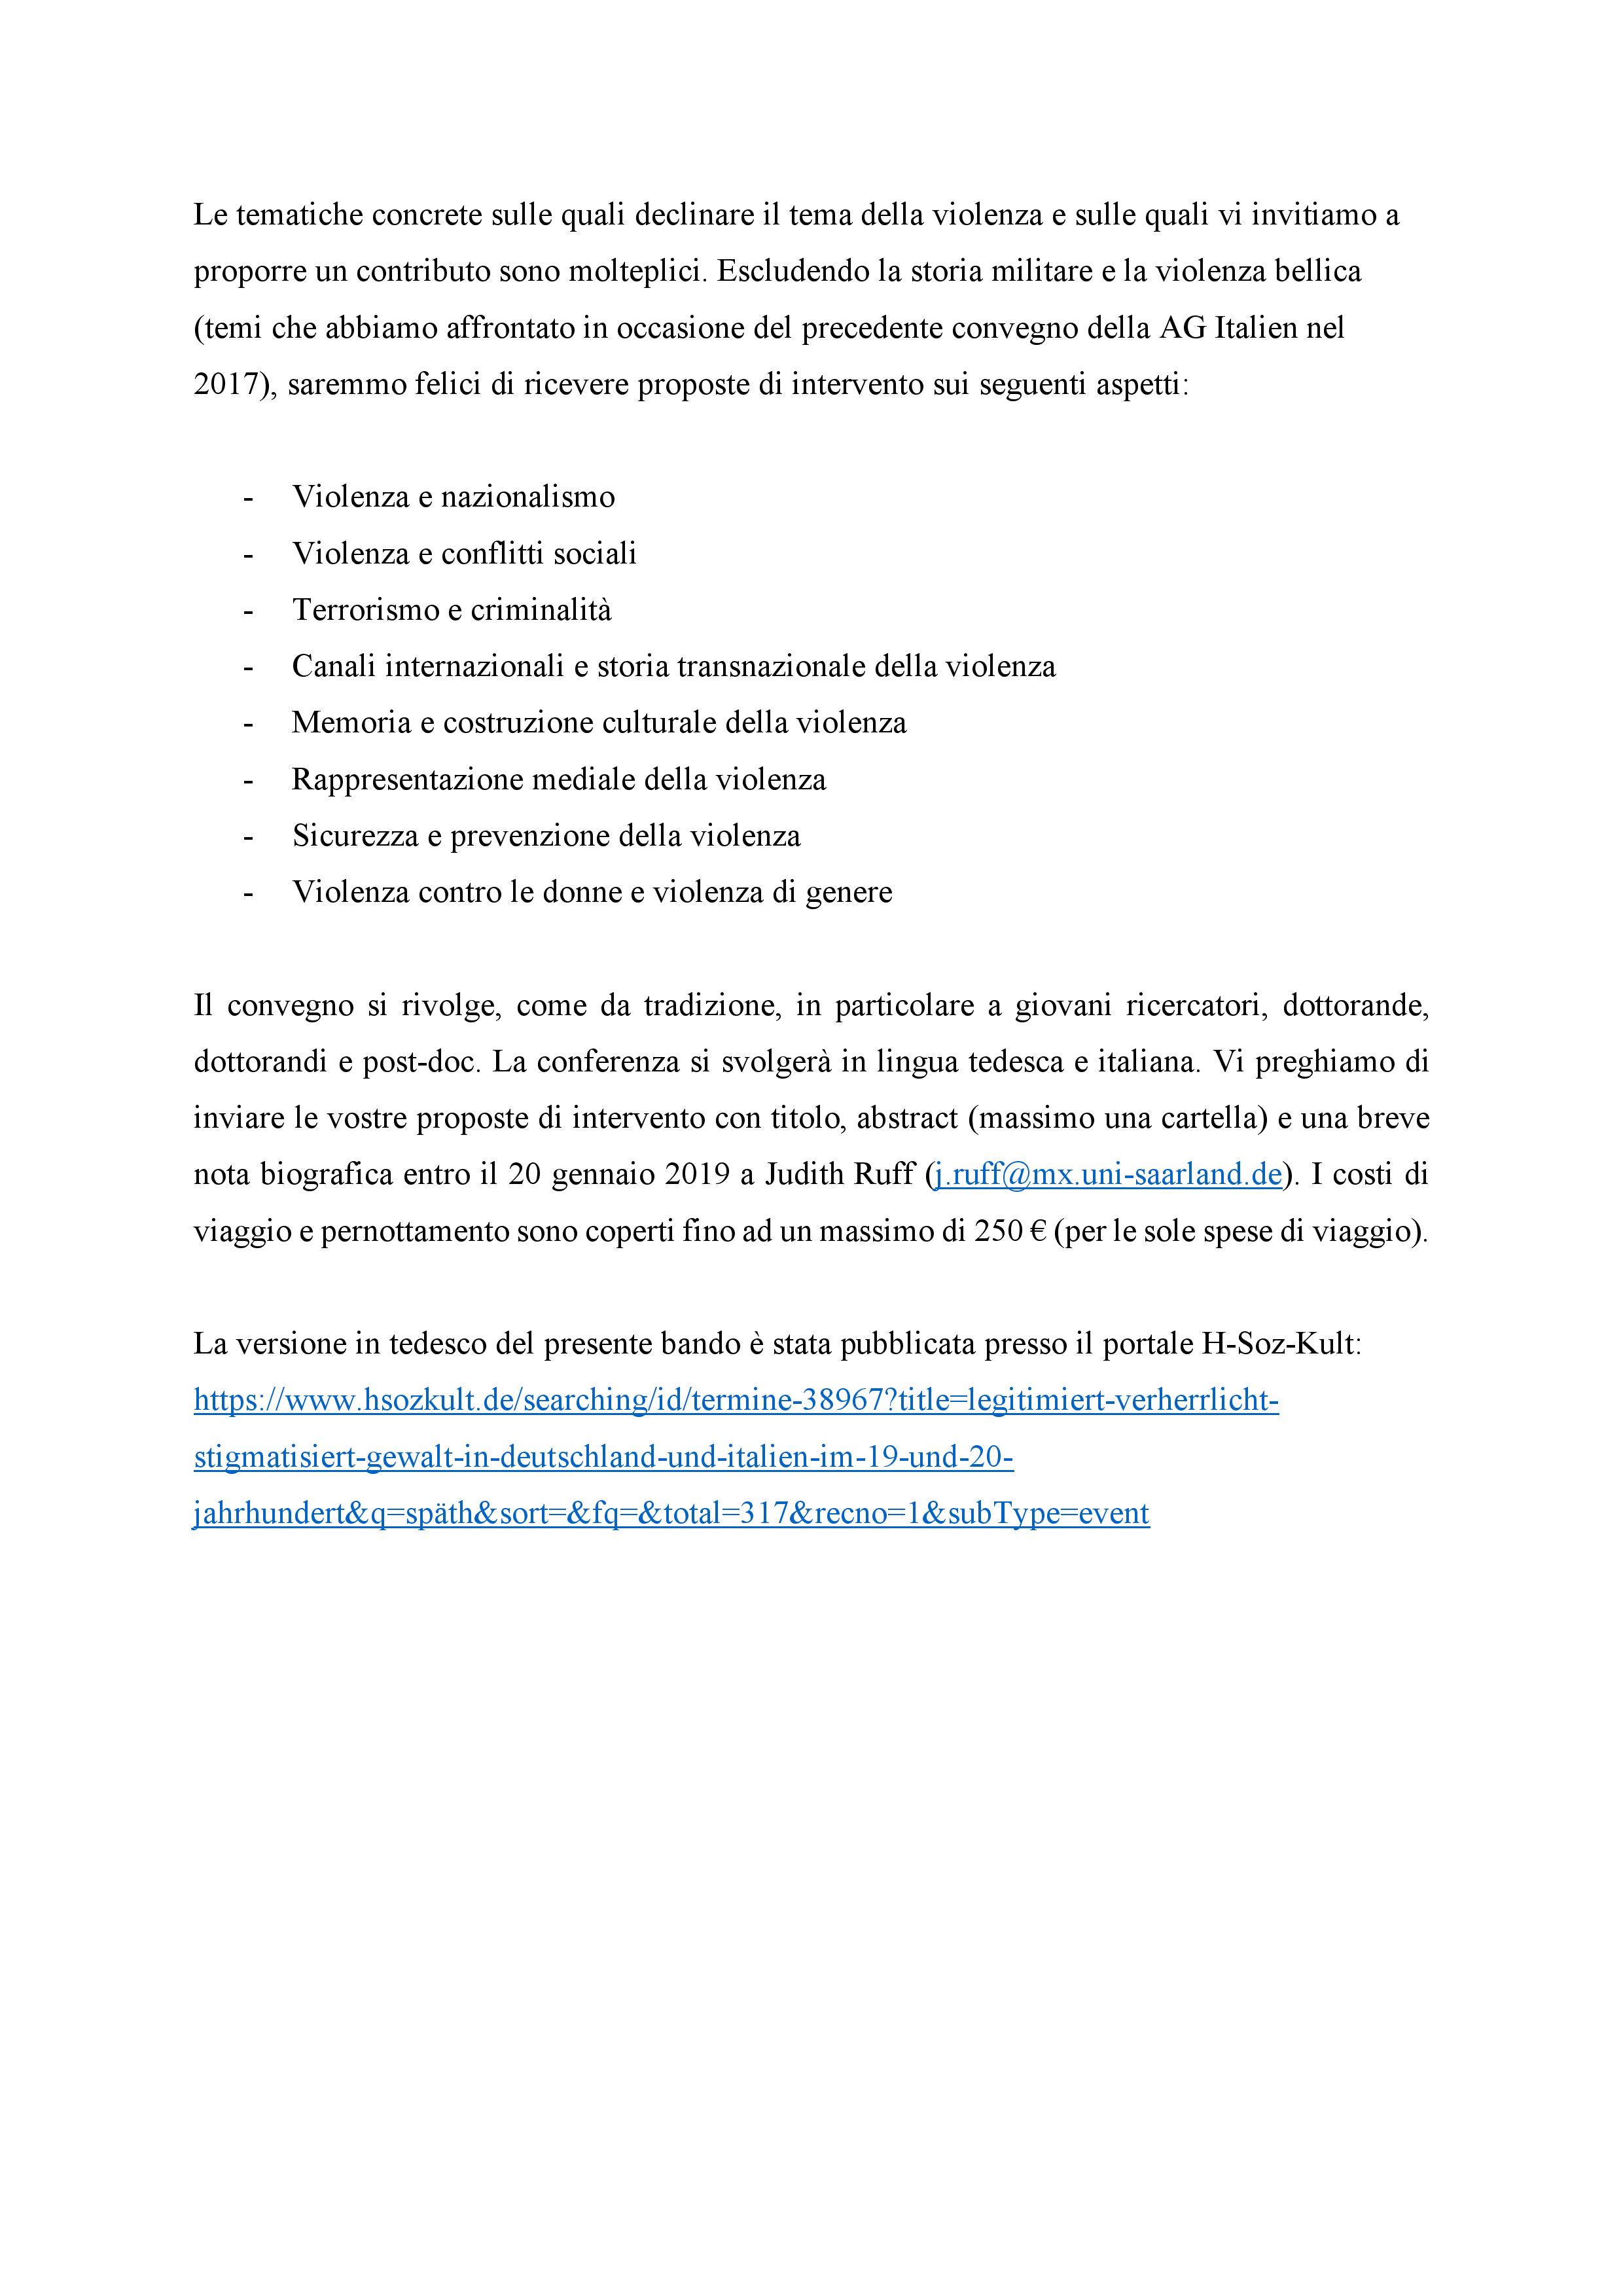 CfP Conferenza AG Italien 2019-page-002